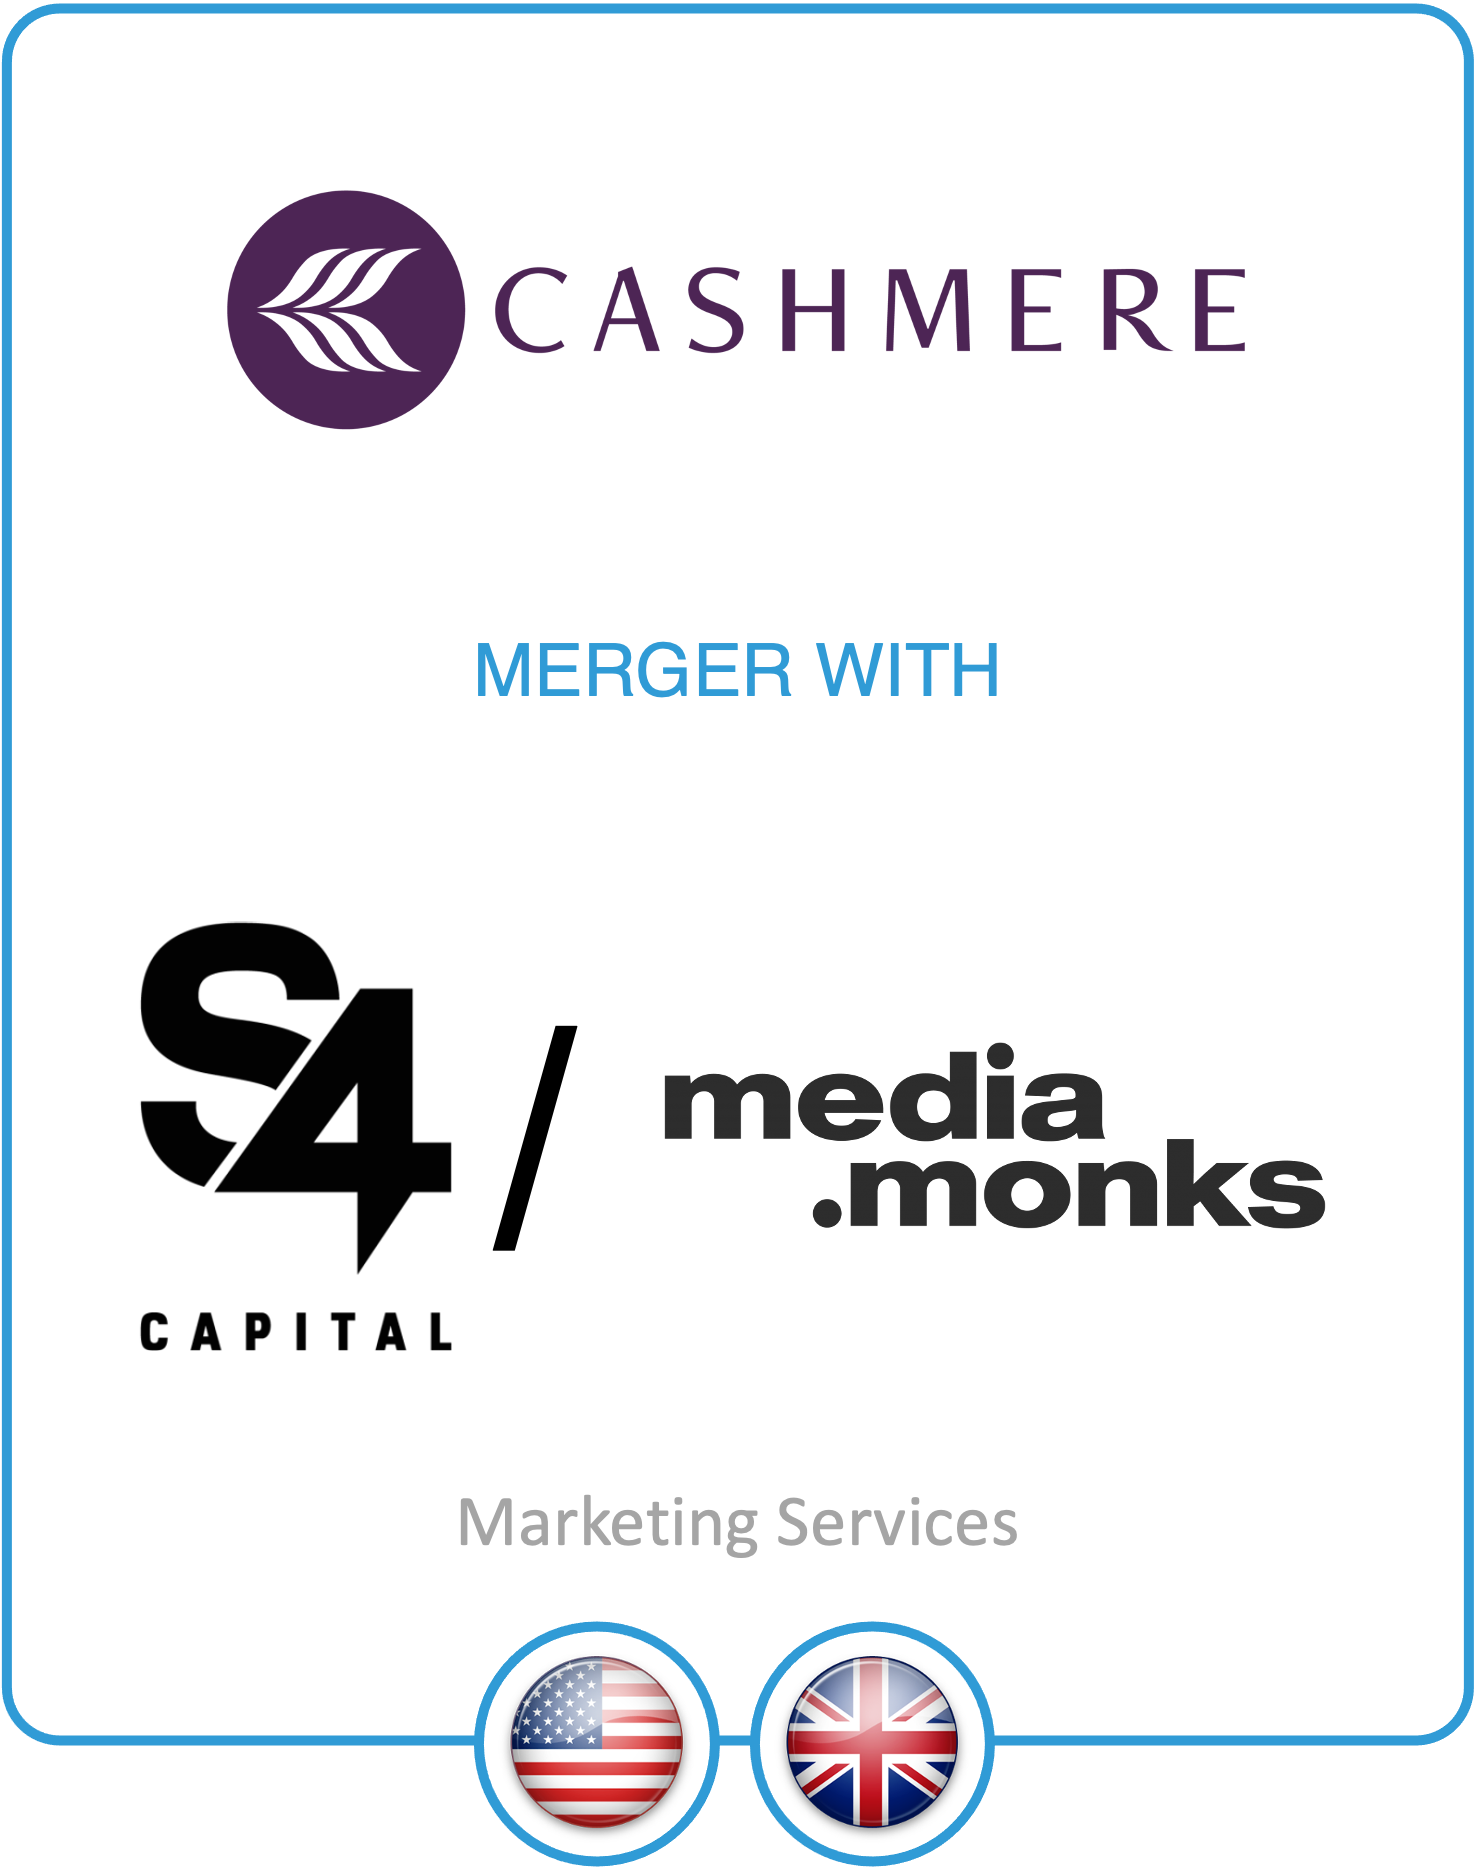 Drake Star Partners Acts As Exclusive Financial Advisor To Cashmere Agency On Its Merger With S4 Capital